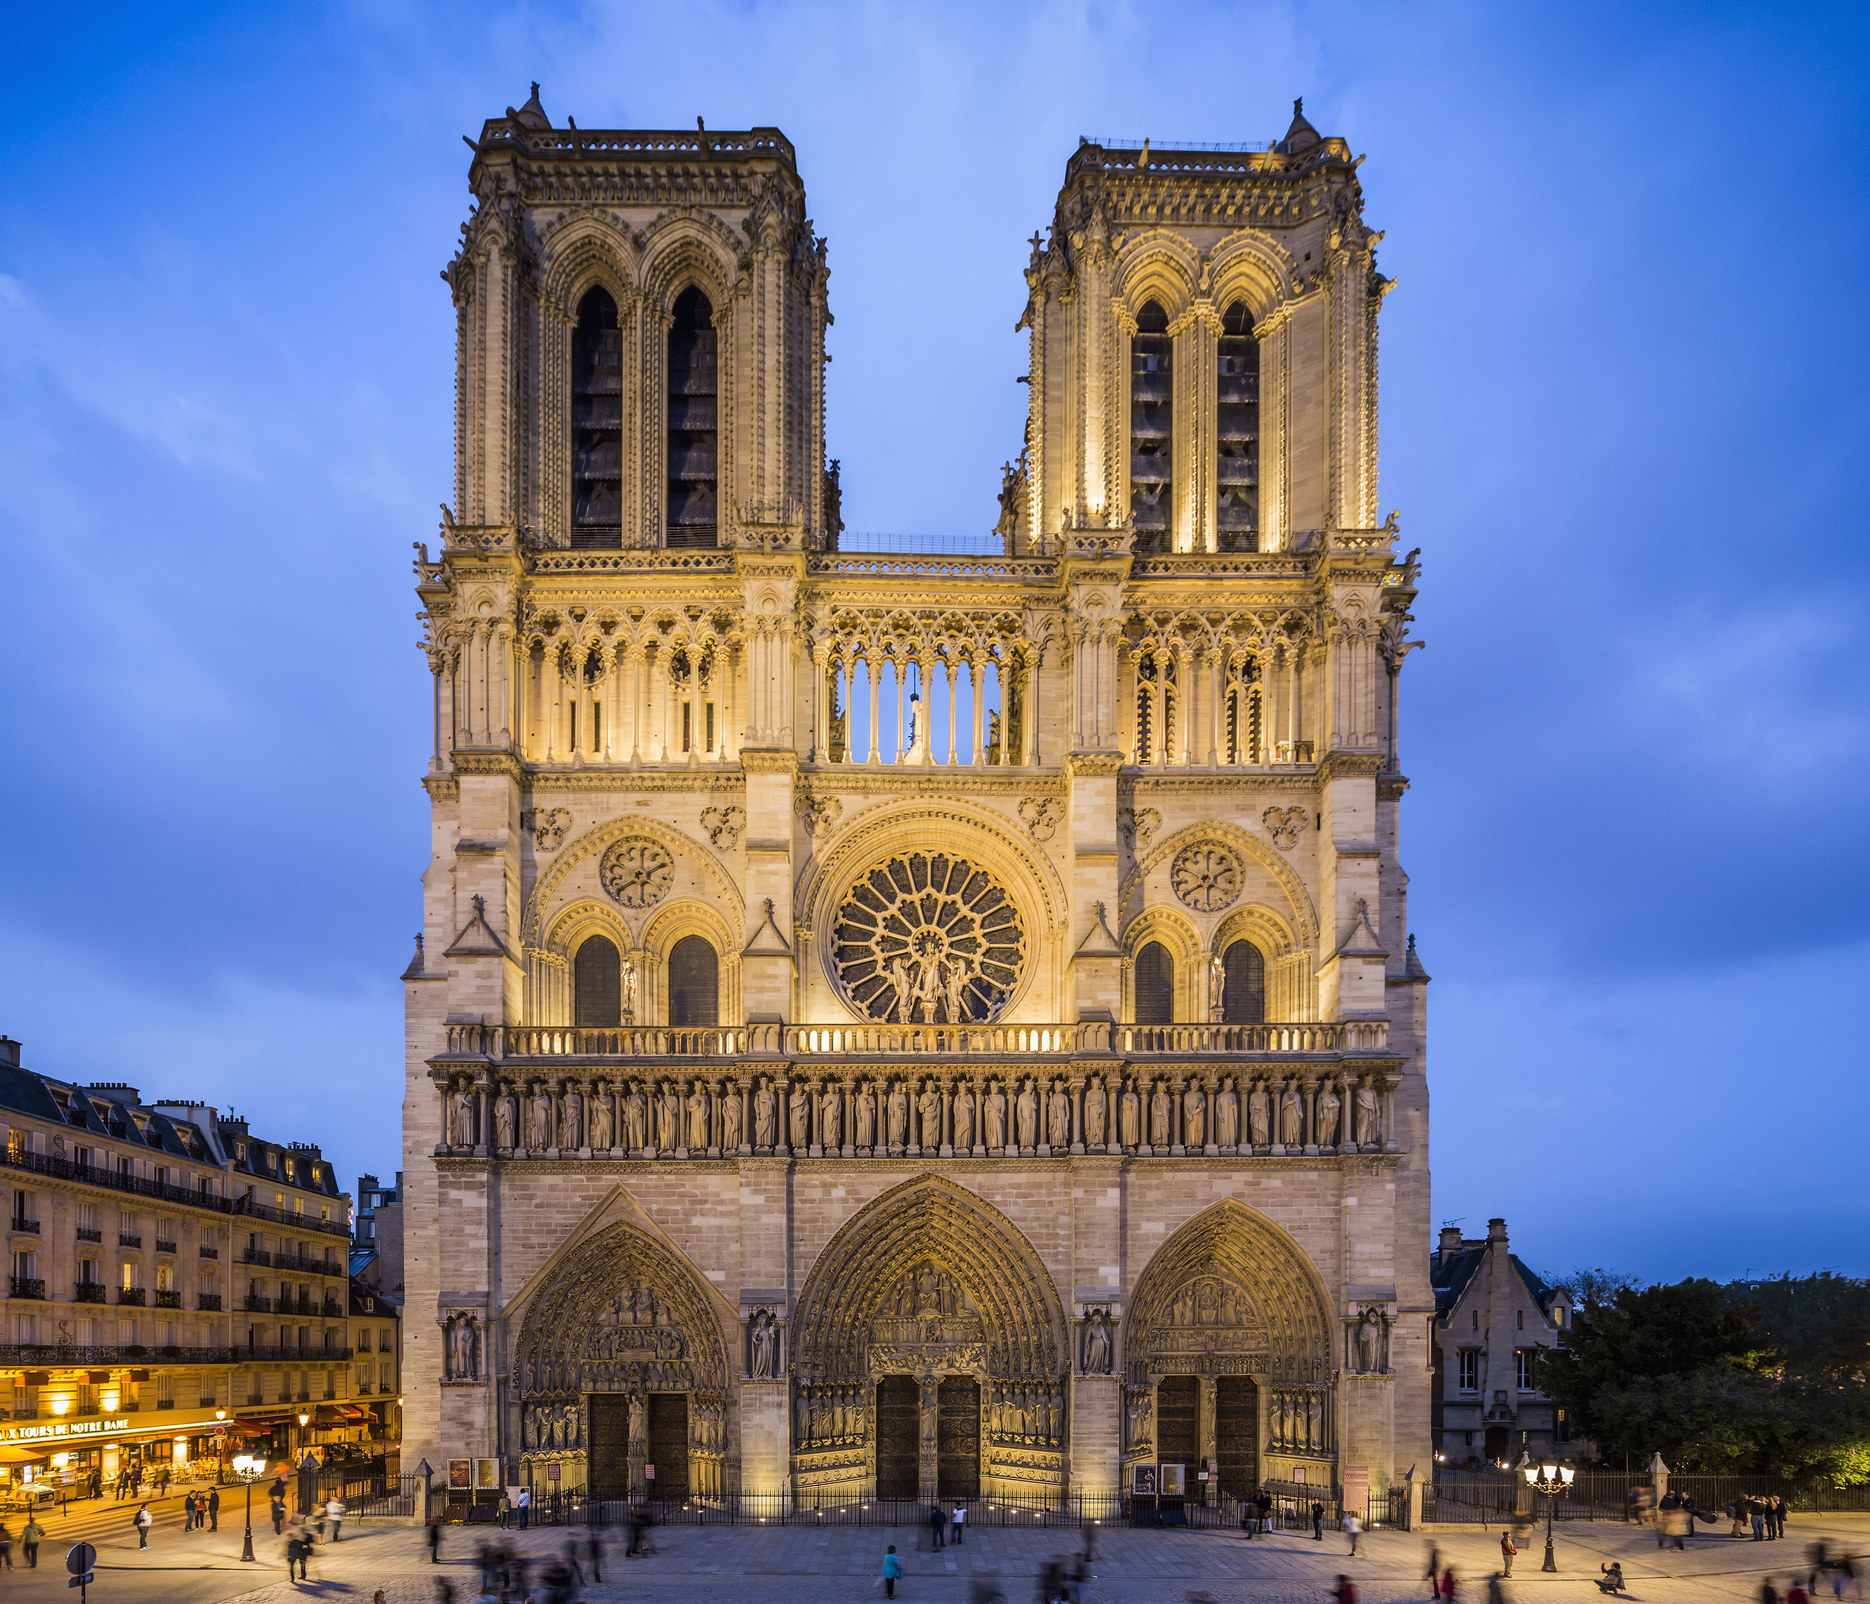 Notre Dame cathedral in Paris.